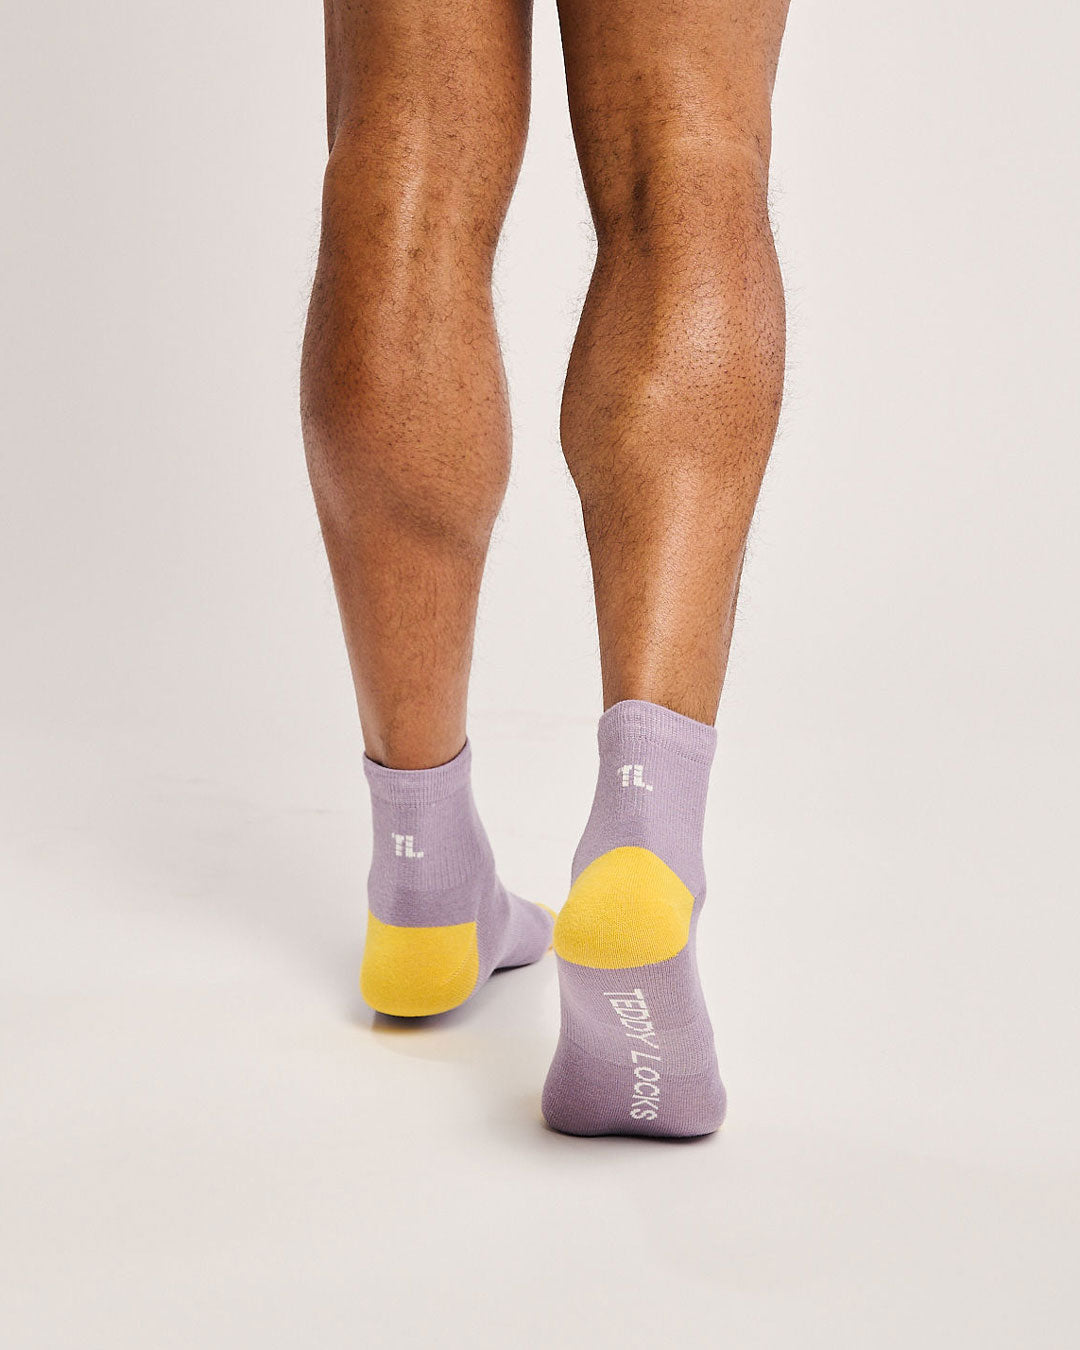 Cycling socks with arch support. Colourful cycling socks.